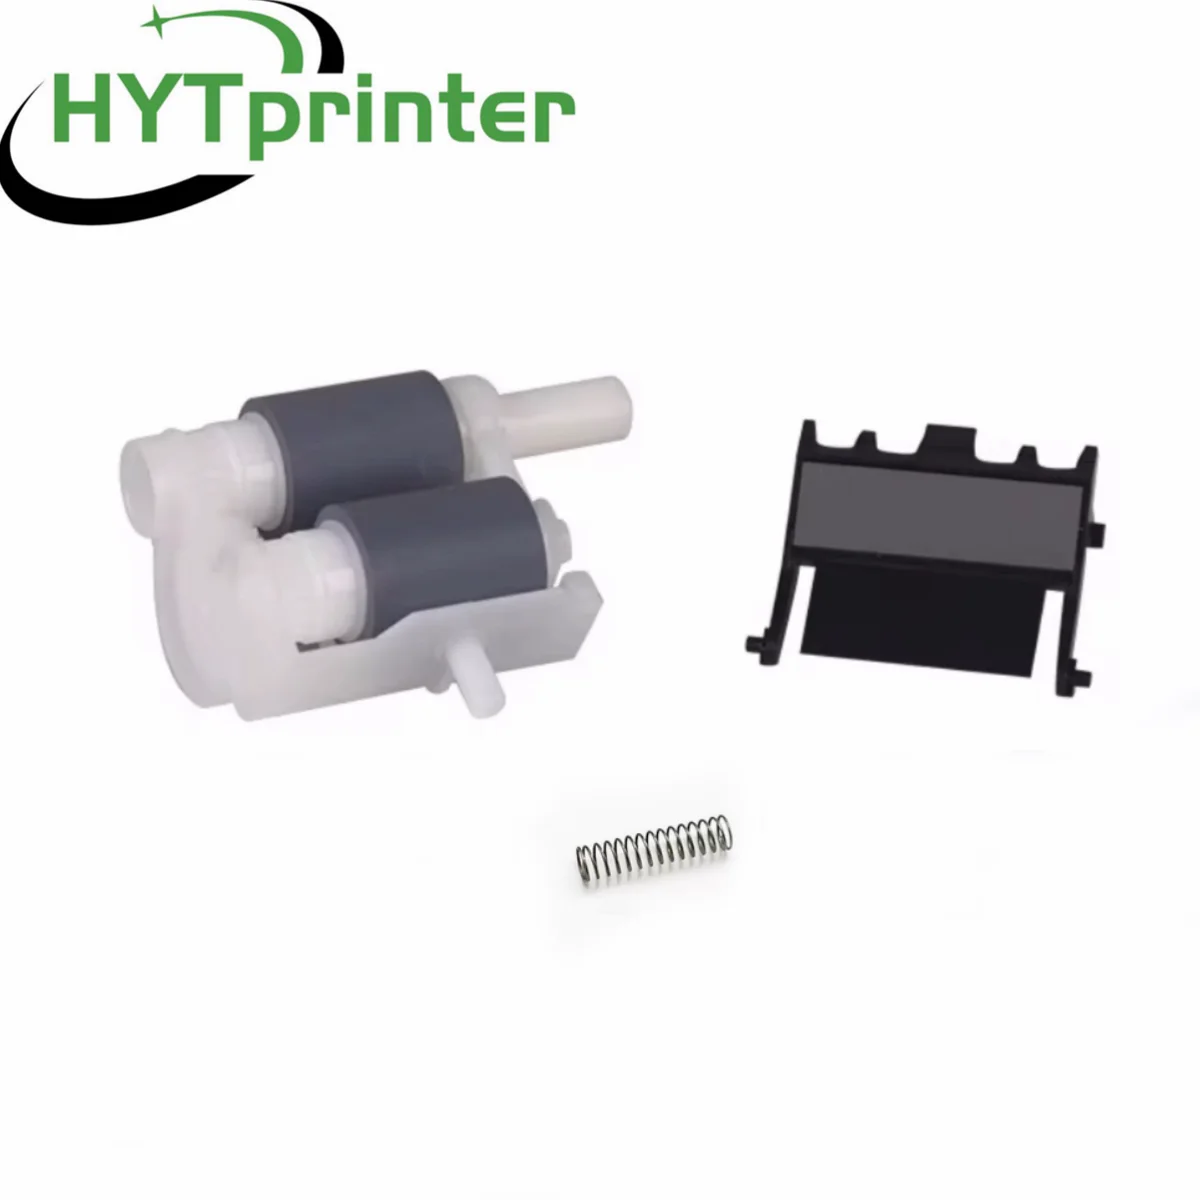 

1set LY7418001 Paper Feed Kit for BROTHER HL 3140 3150 3170 3172 3180 MFC 9130 9140 9142 9330 9332 9335 9340 9342 DCP 9015 9017